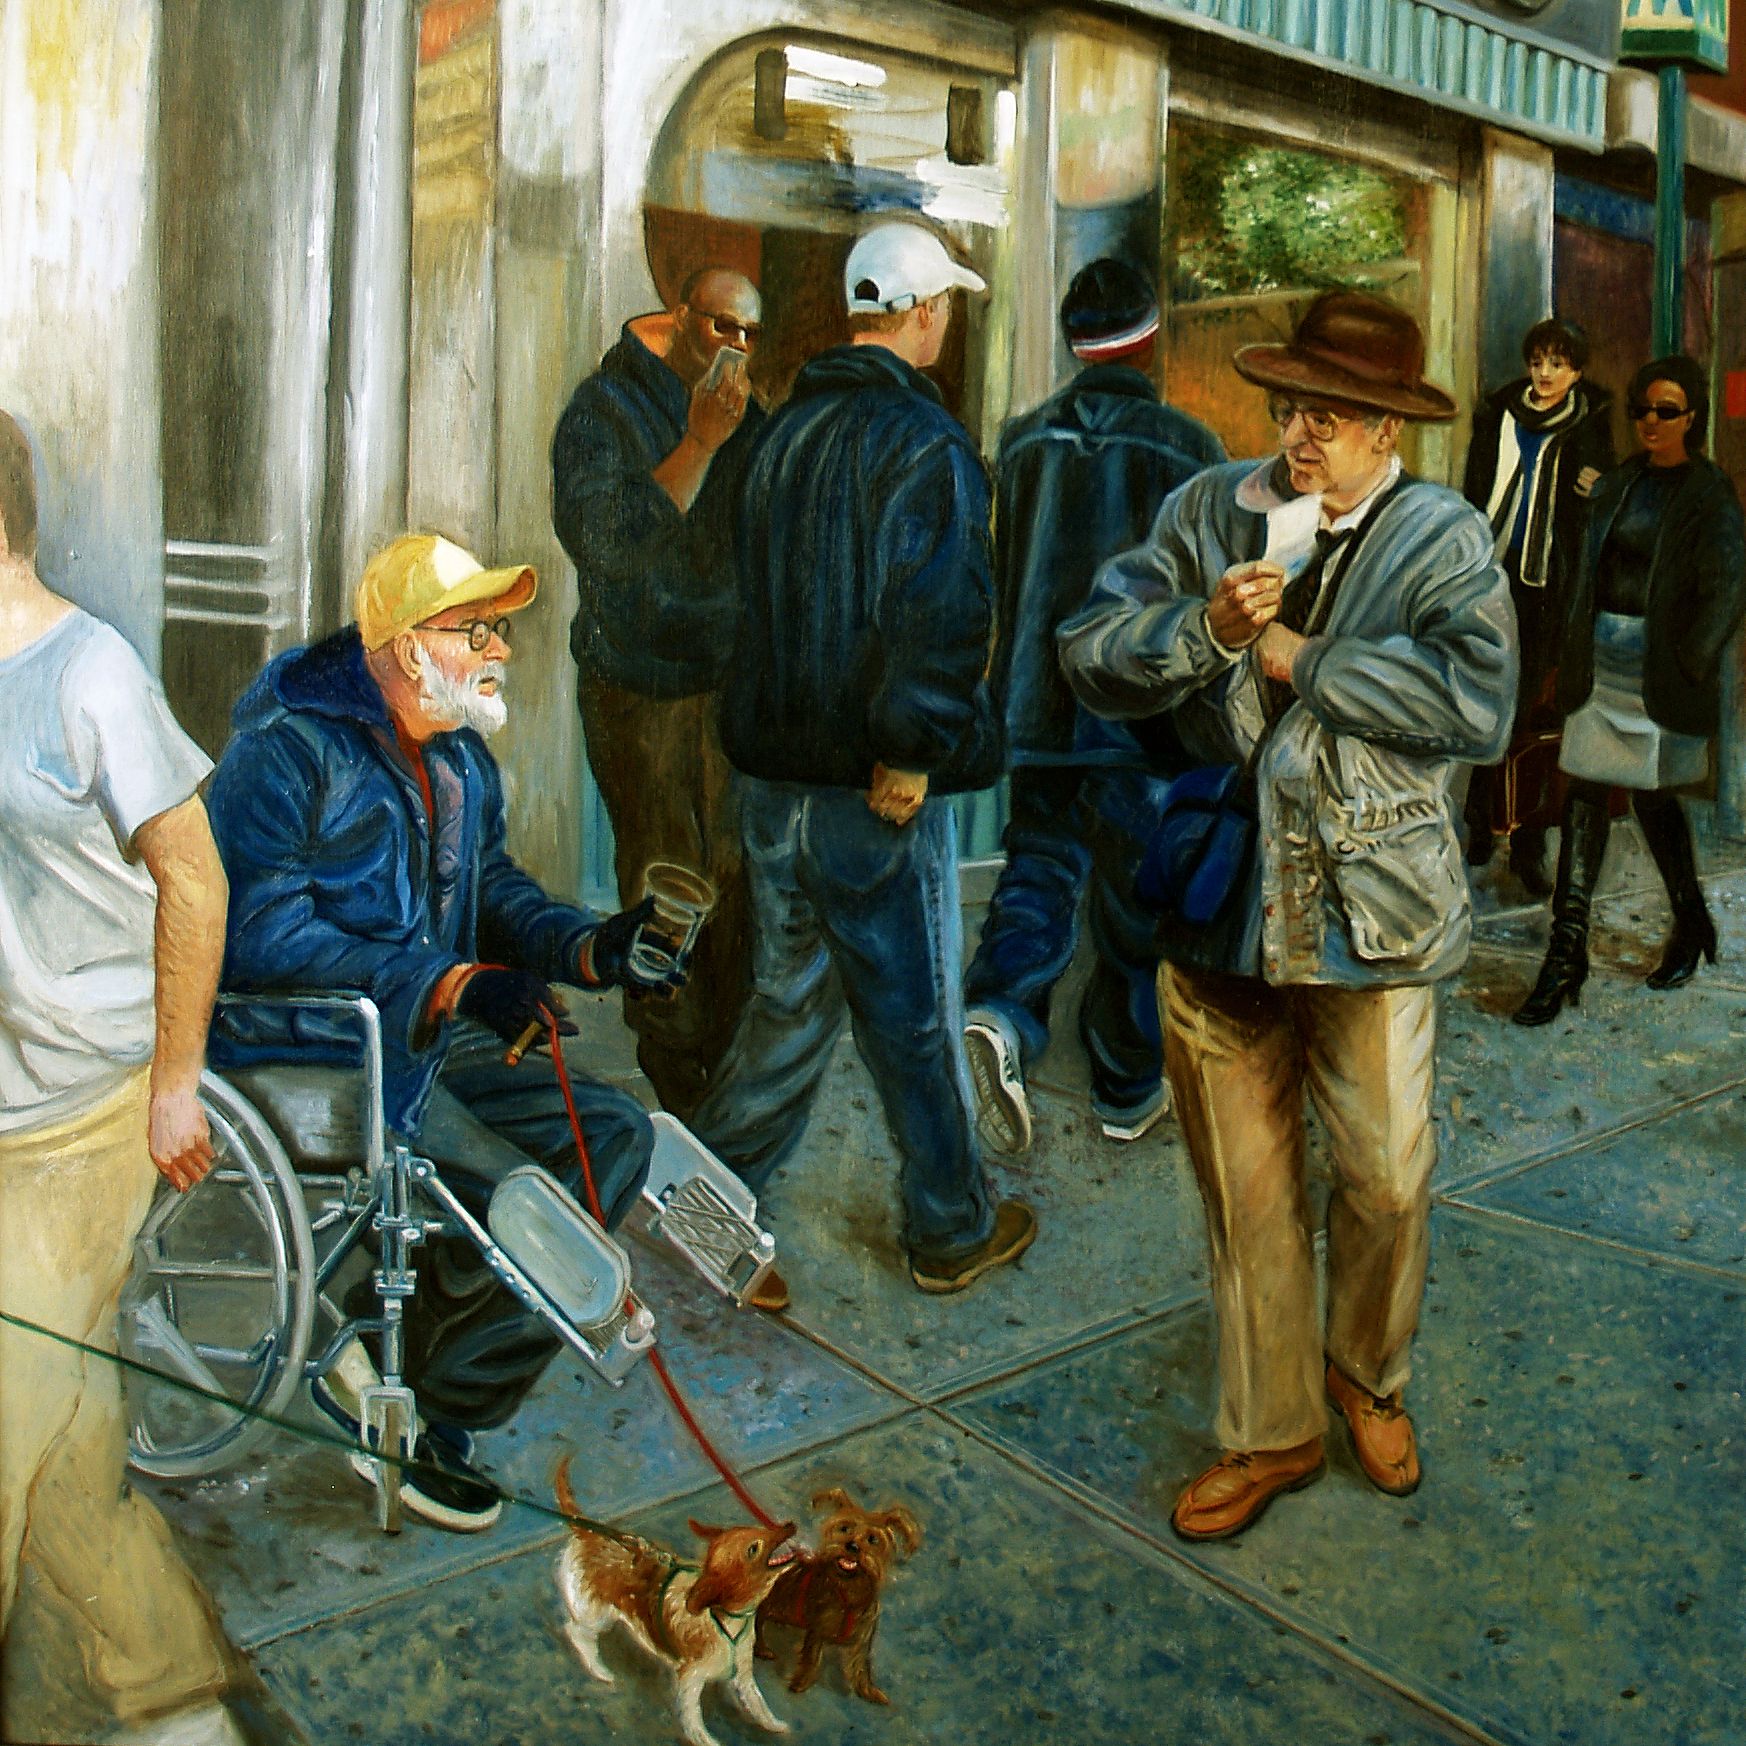 86th Street Rush | Figurative Oil Painting by John Varriano